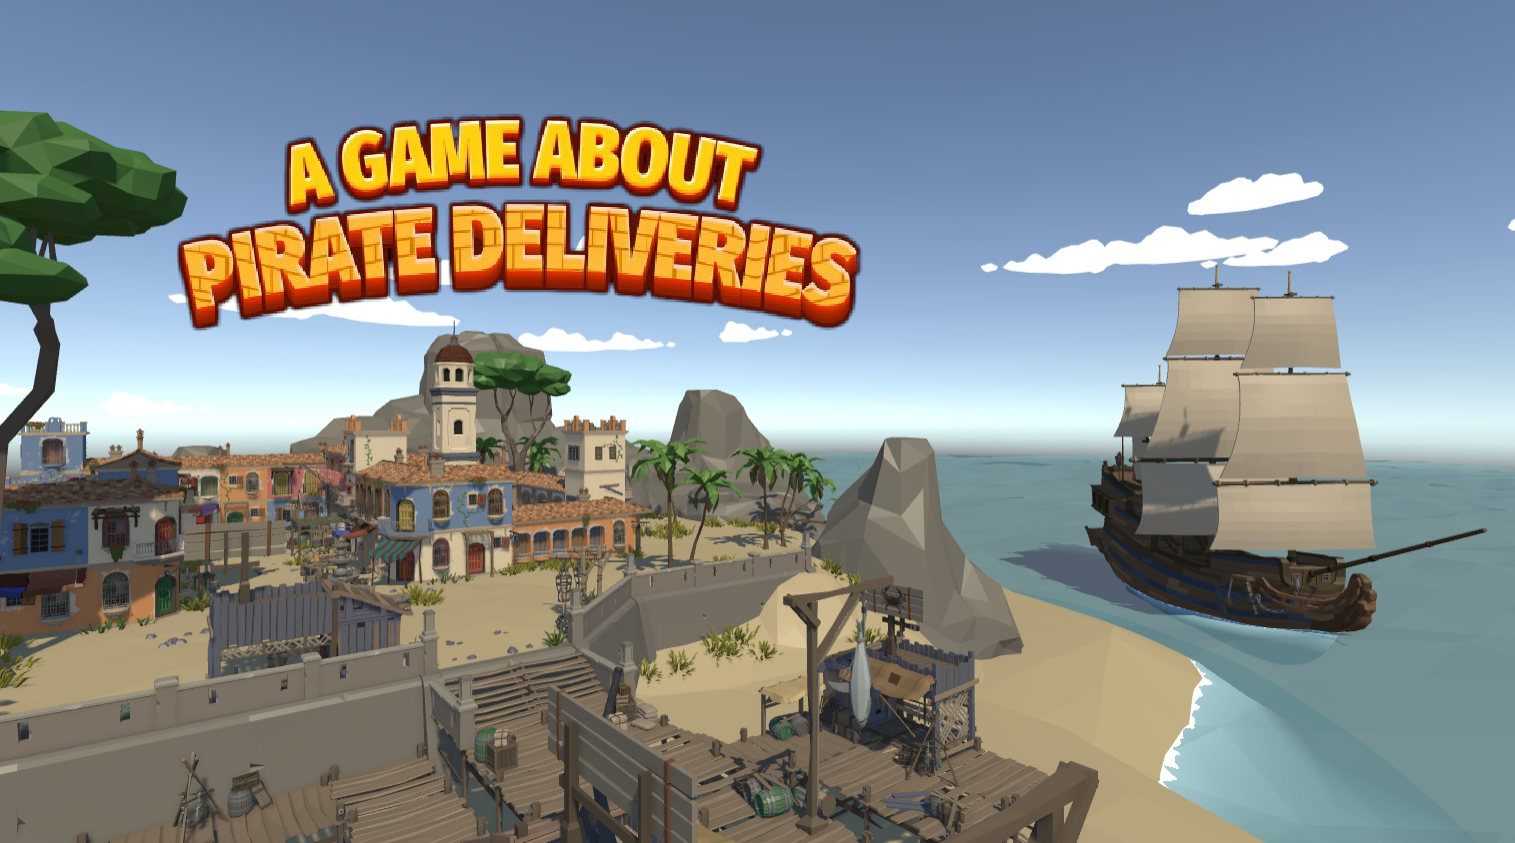 A game about pirate deliveries